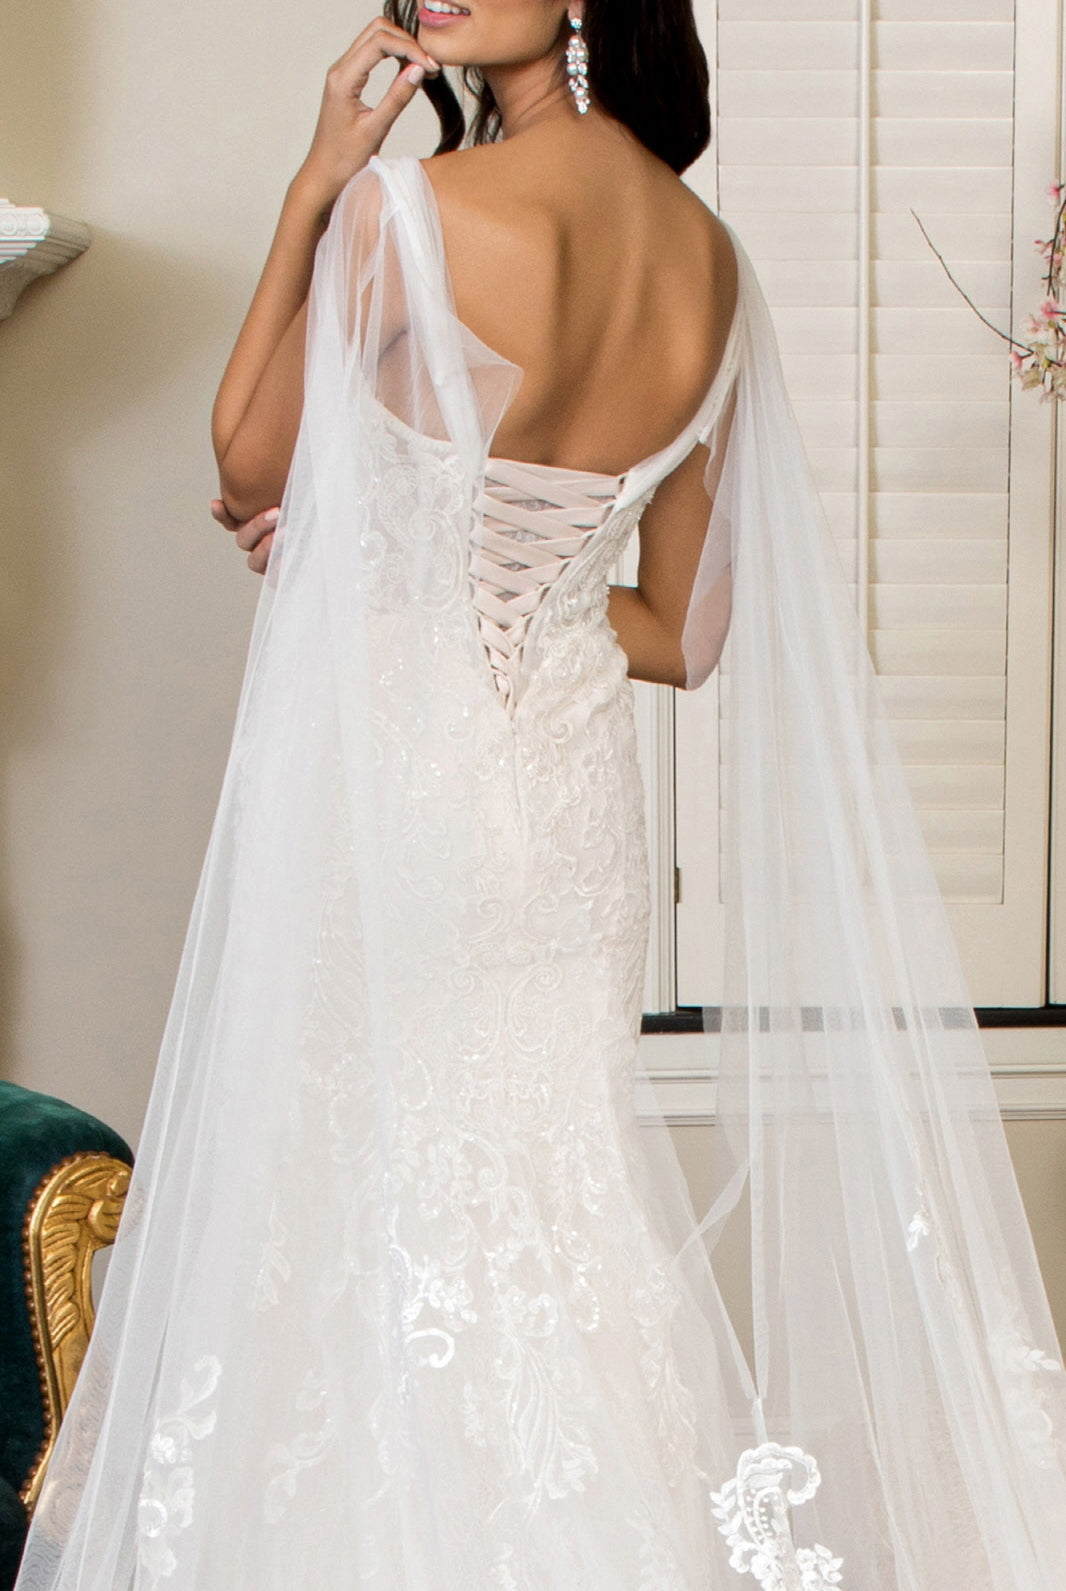 Embroidered V-Neck Mermaid Wedding Gown Detachable Cape - Mask Not Included GLGL1935-WEDDING GOWNS-smcfashion.com